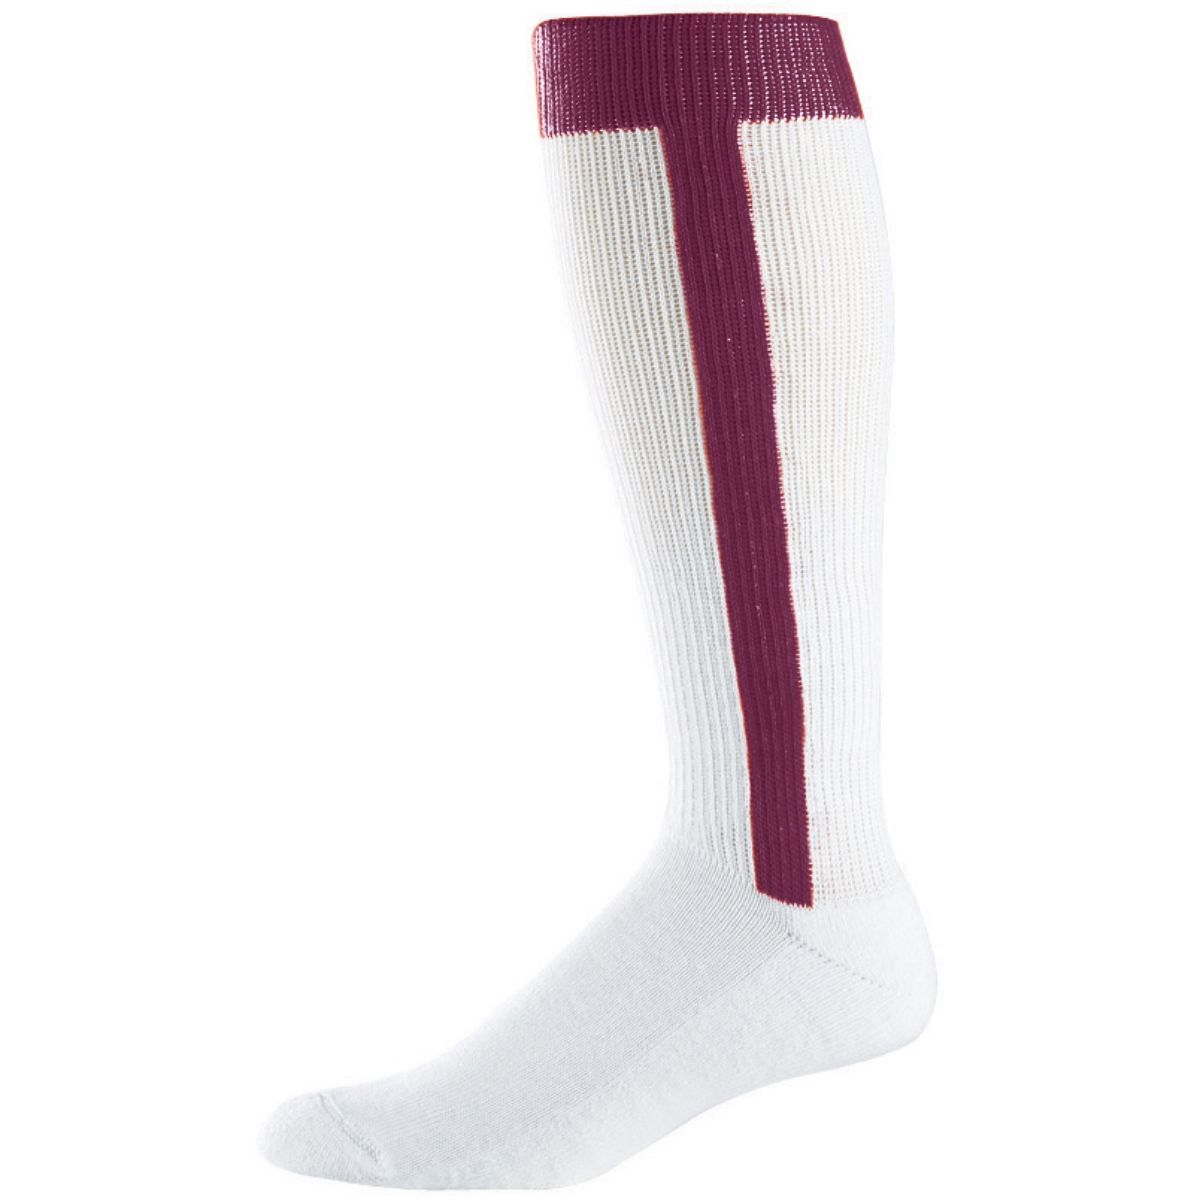 Augusta Sportswear Baseball Stirrup Sock in Maroon (Hlw)  -Part of the Accessories, Augusta-Products, Accessories-Socks, Baseball, All-Sports, All-Sports-1 product lines at KanaleyCreations.com